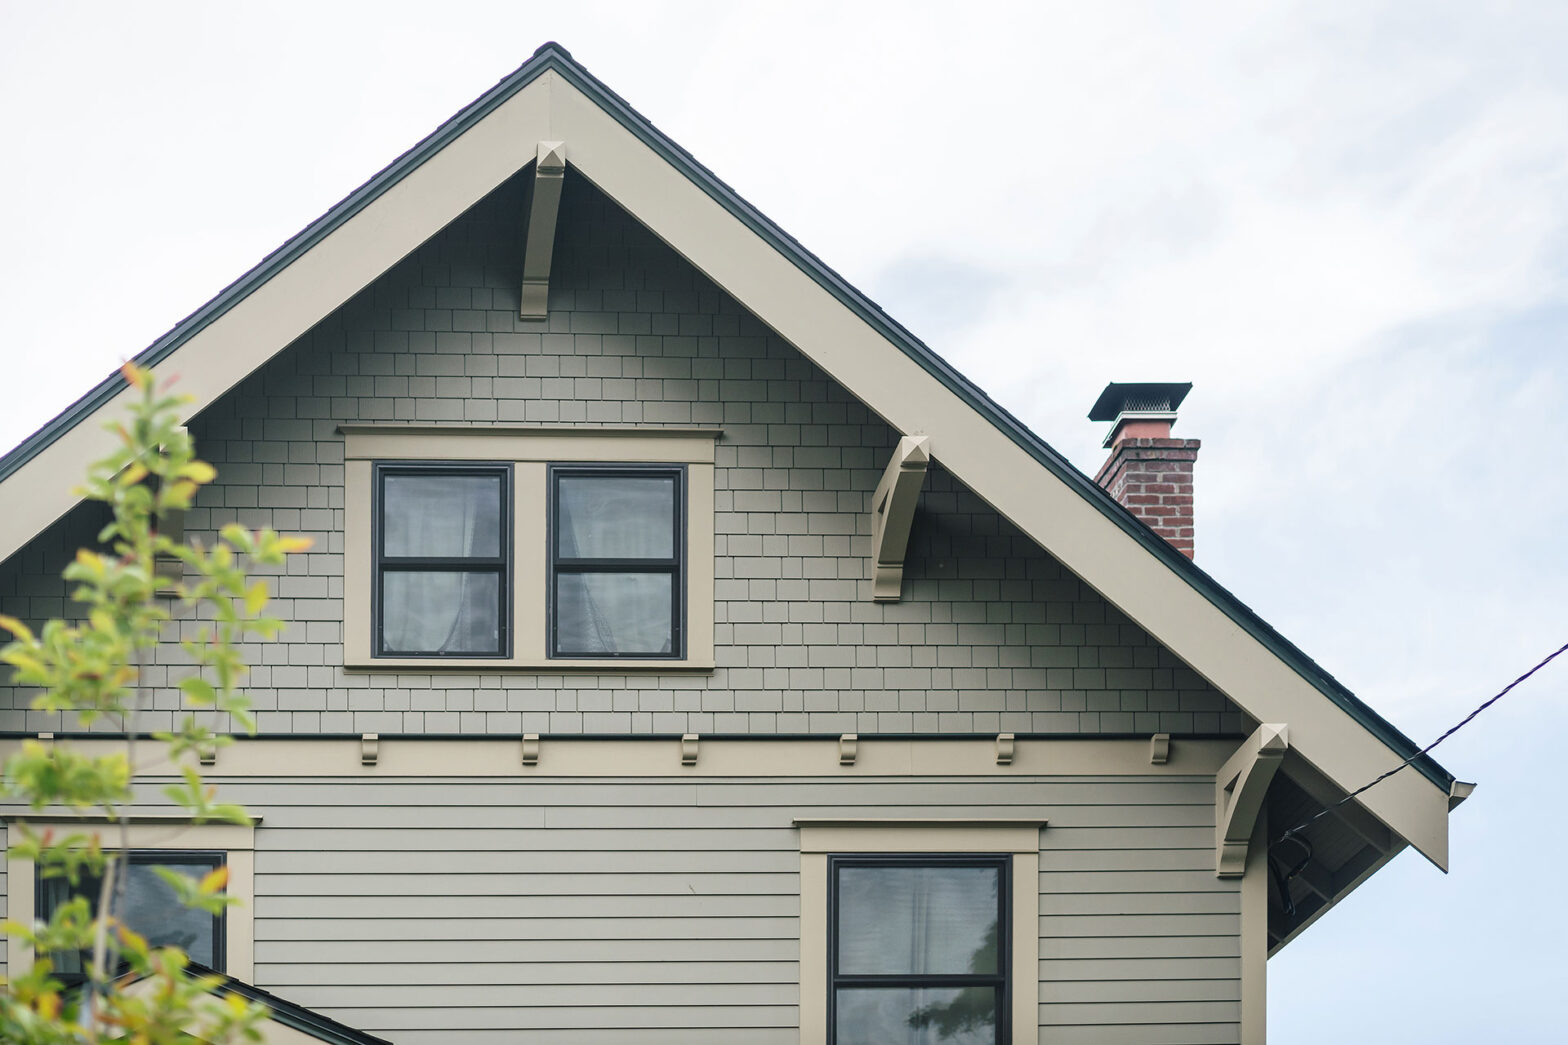 Traditional craftsman detailing graces the front elevation of the home.